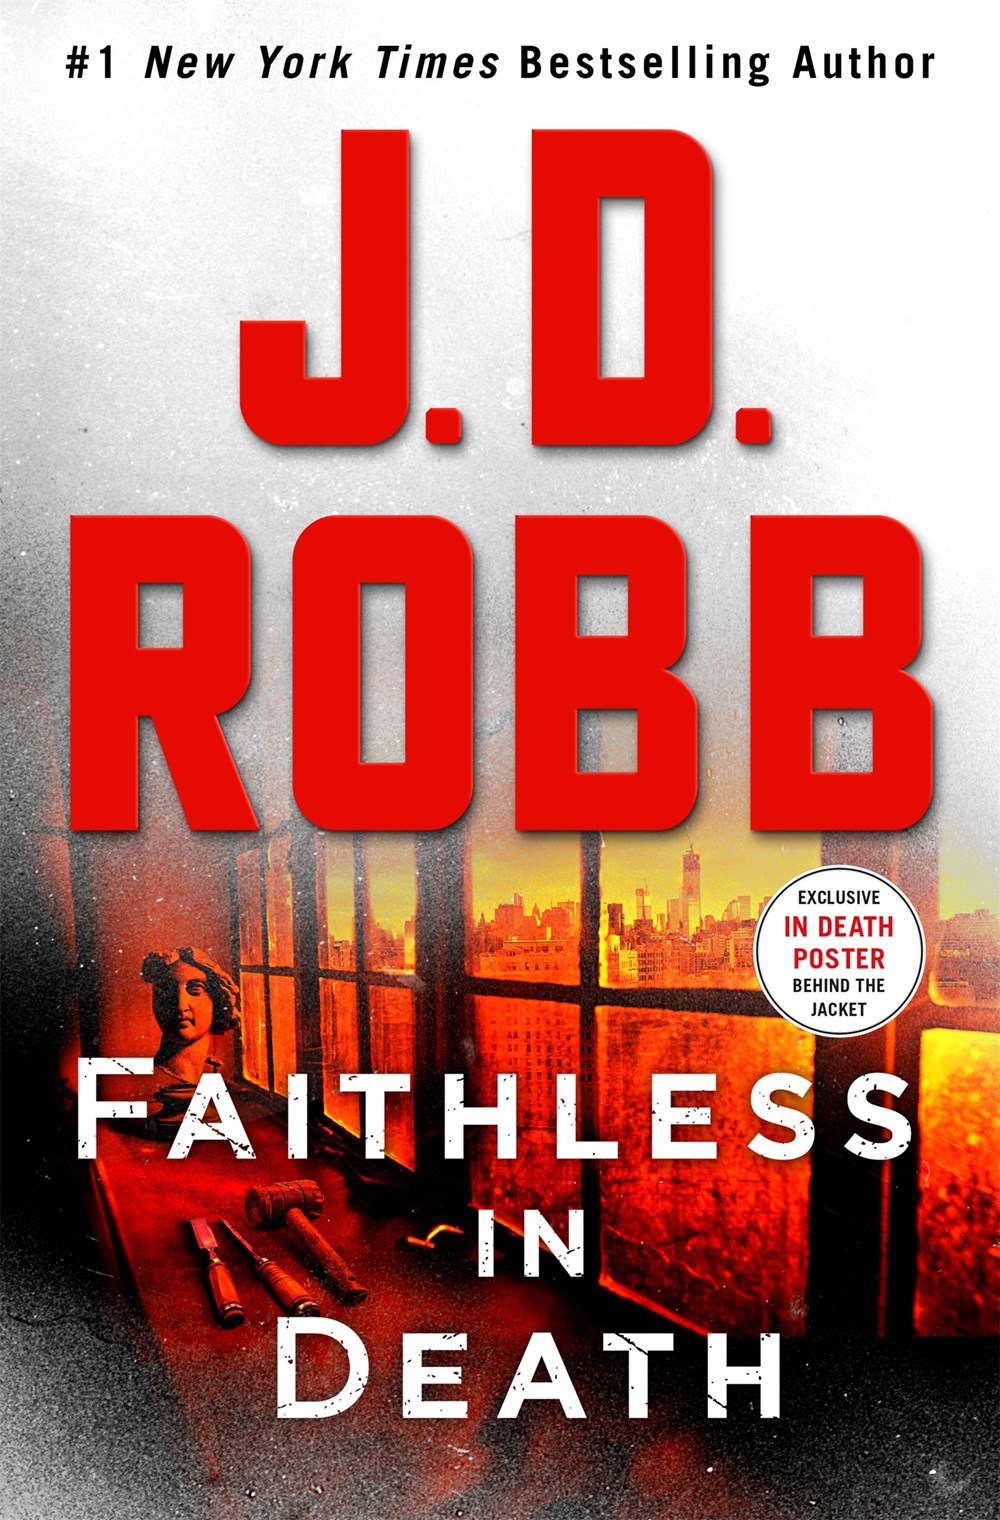 Read-Alikes for “Faithless in Death” by J. D. Robb | LibraryReads